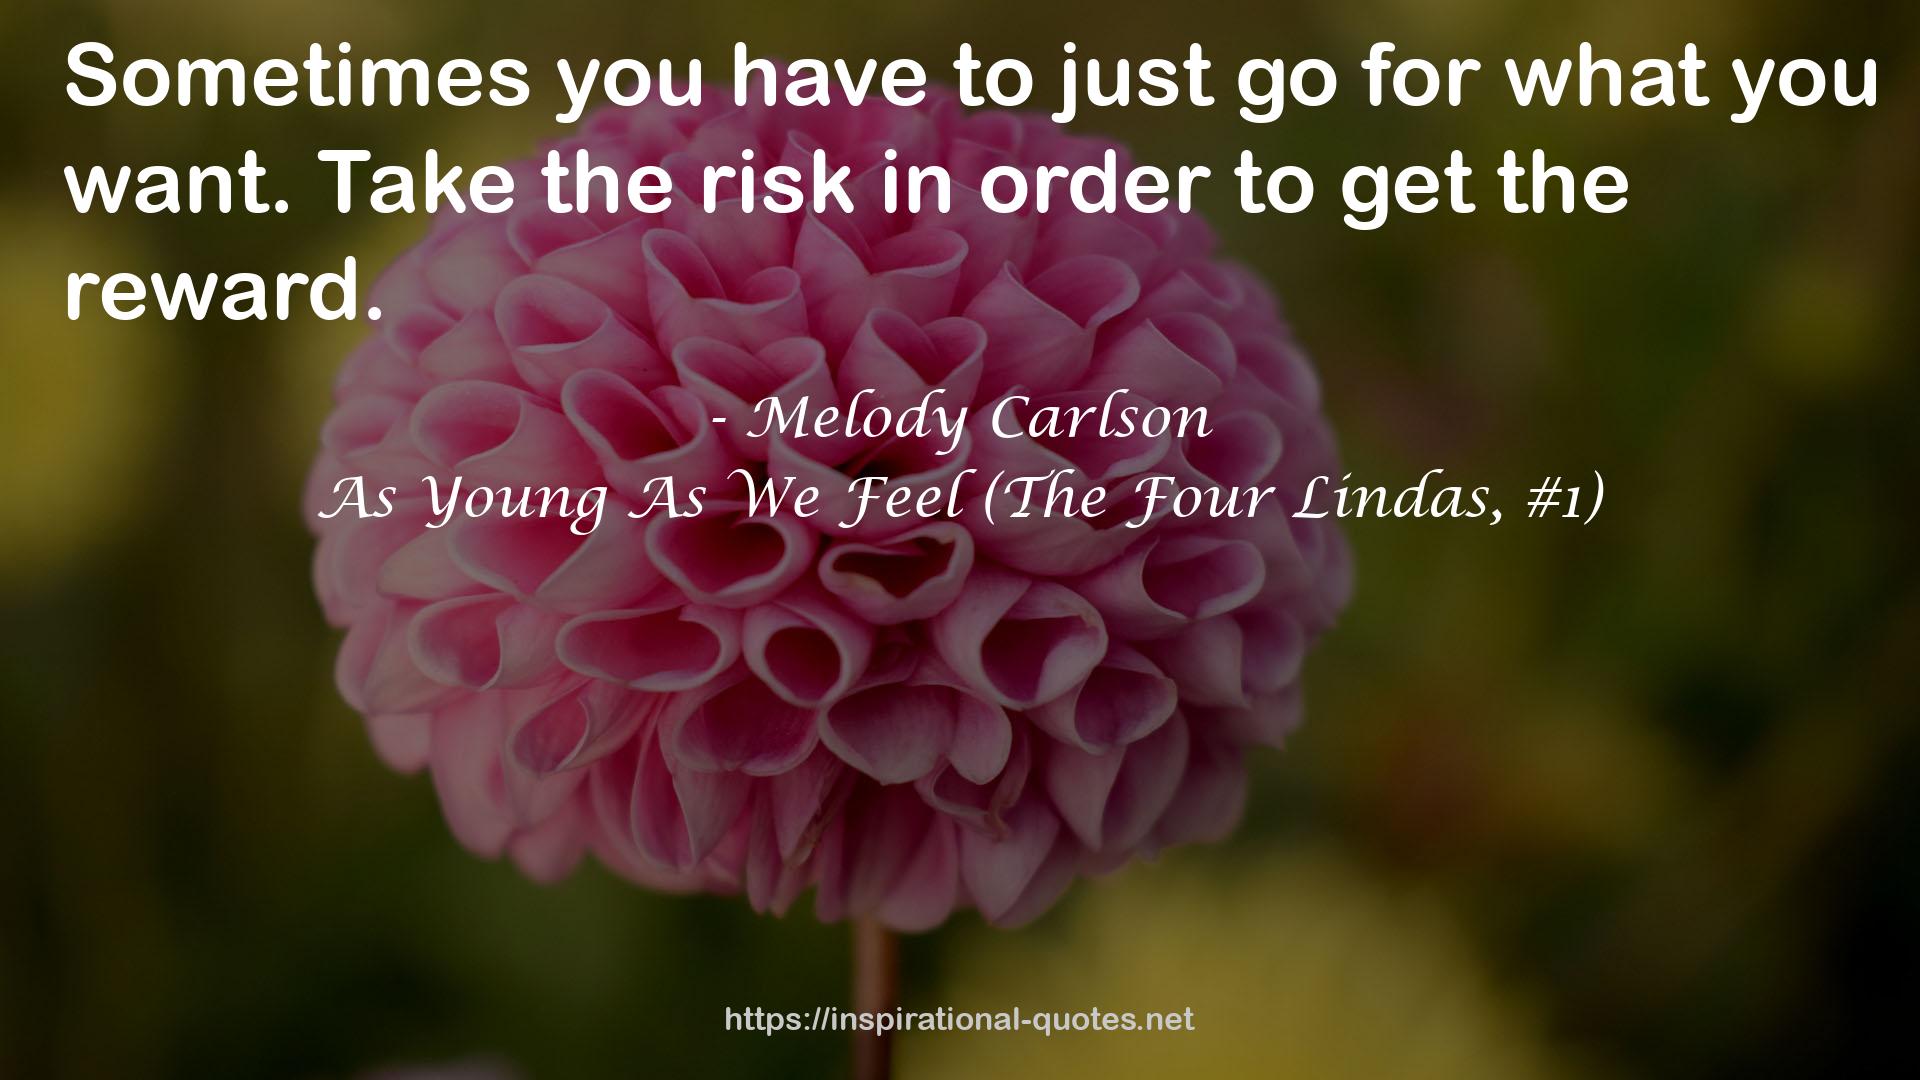 As Young As We Feel (The Four Lindas, #1) QUOTES